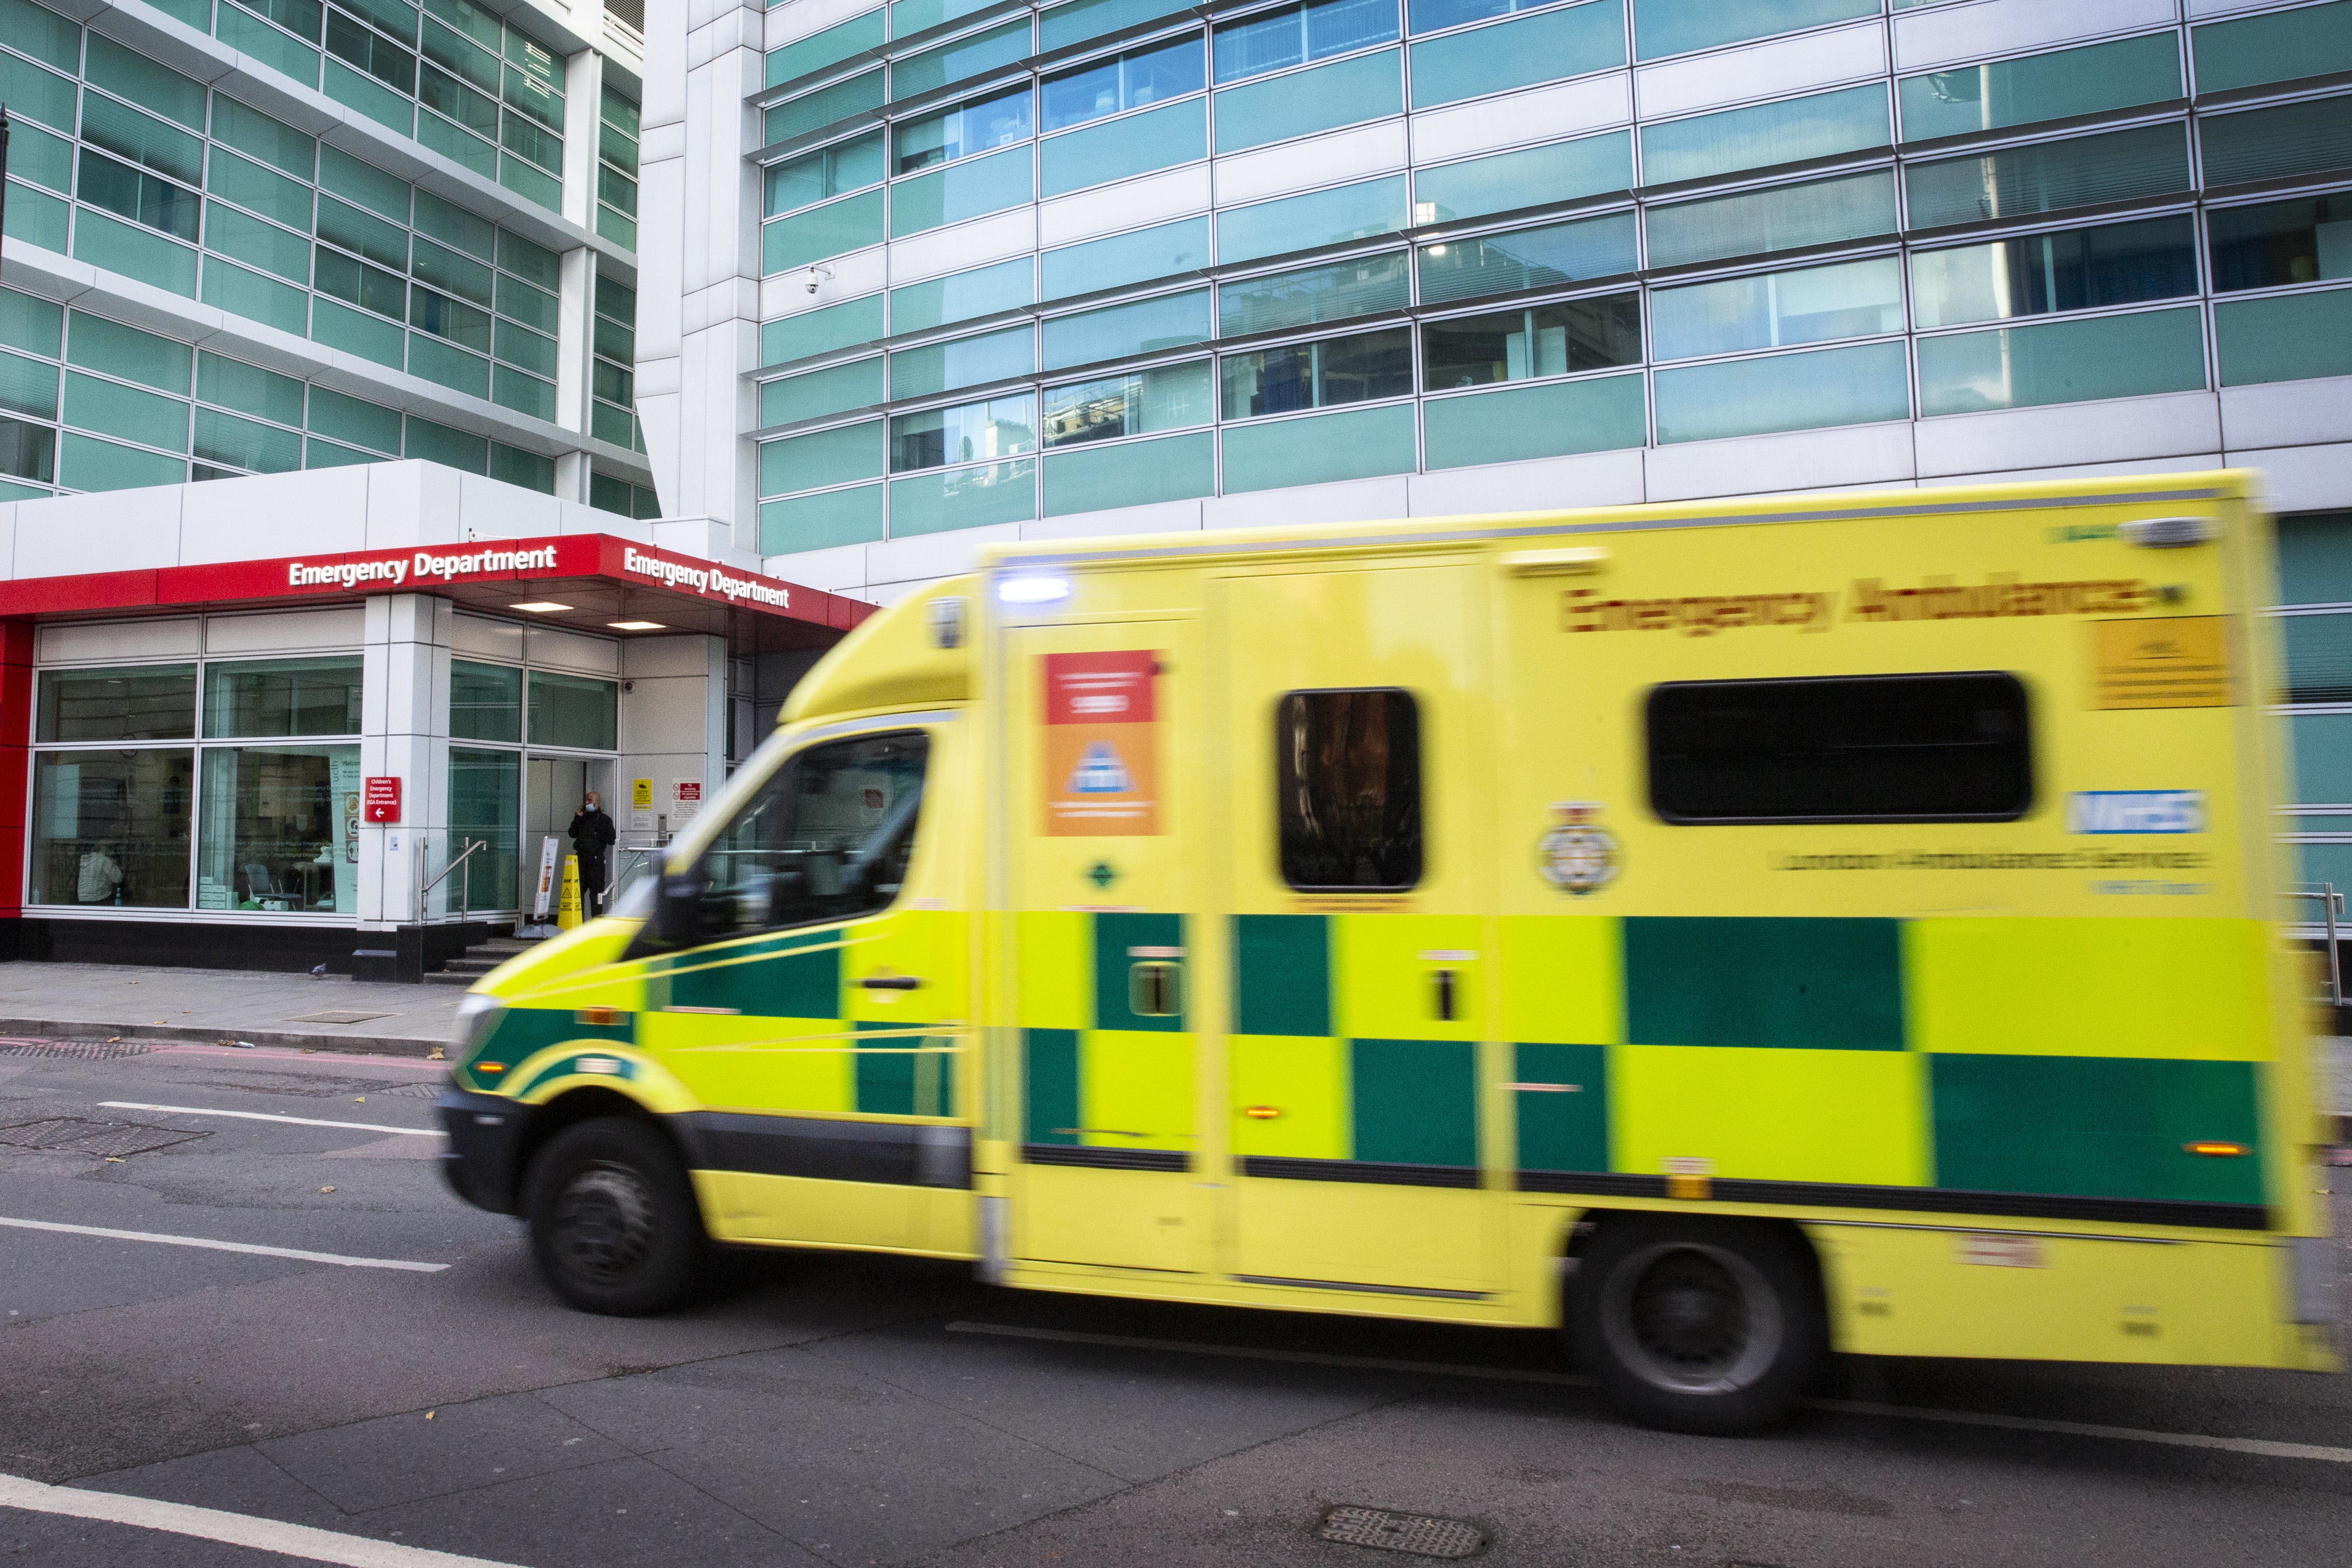 Health secretary Steve Barclay has met union chiefs to discuss ’emergency coverage’ during ambulance strikes